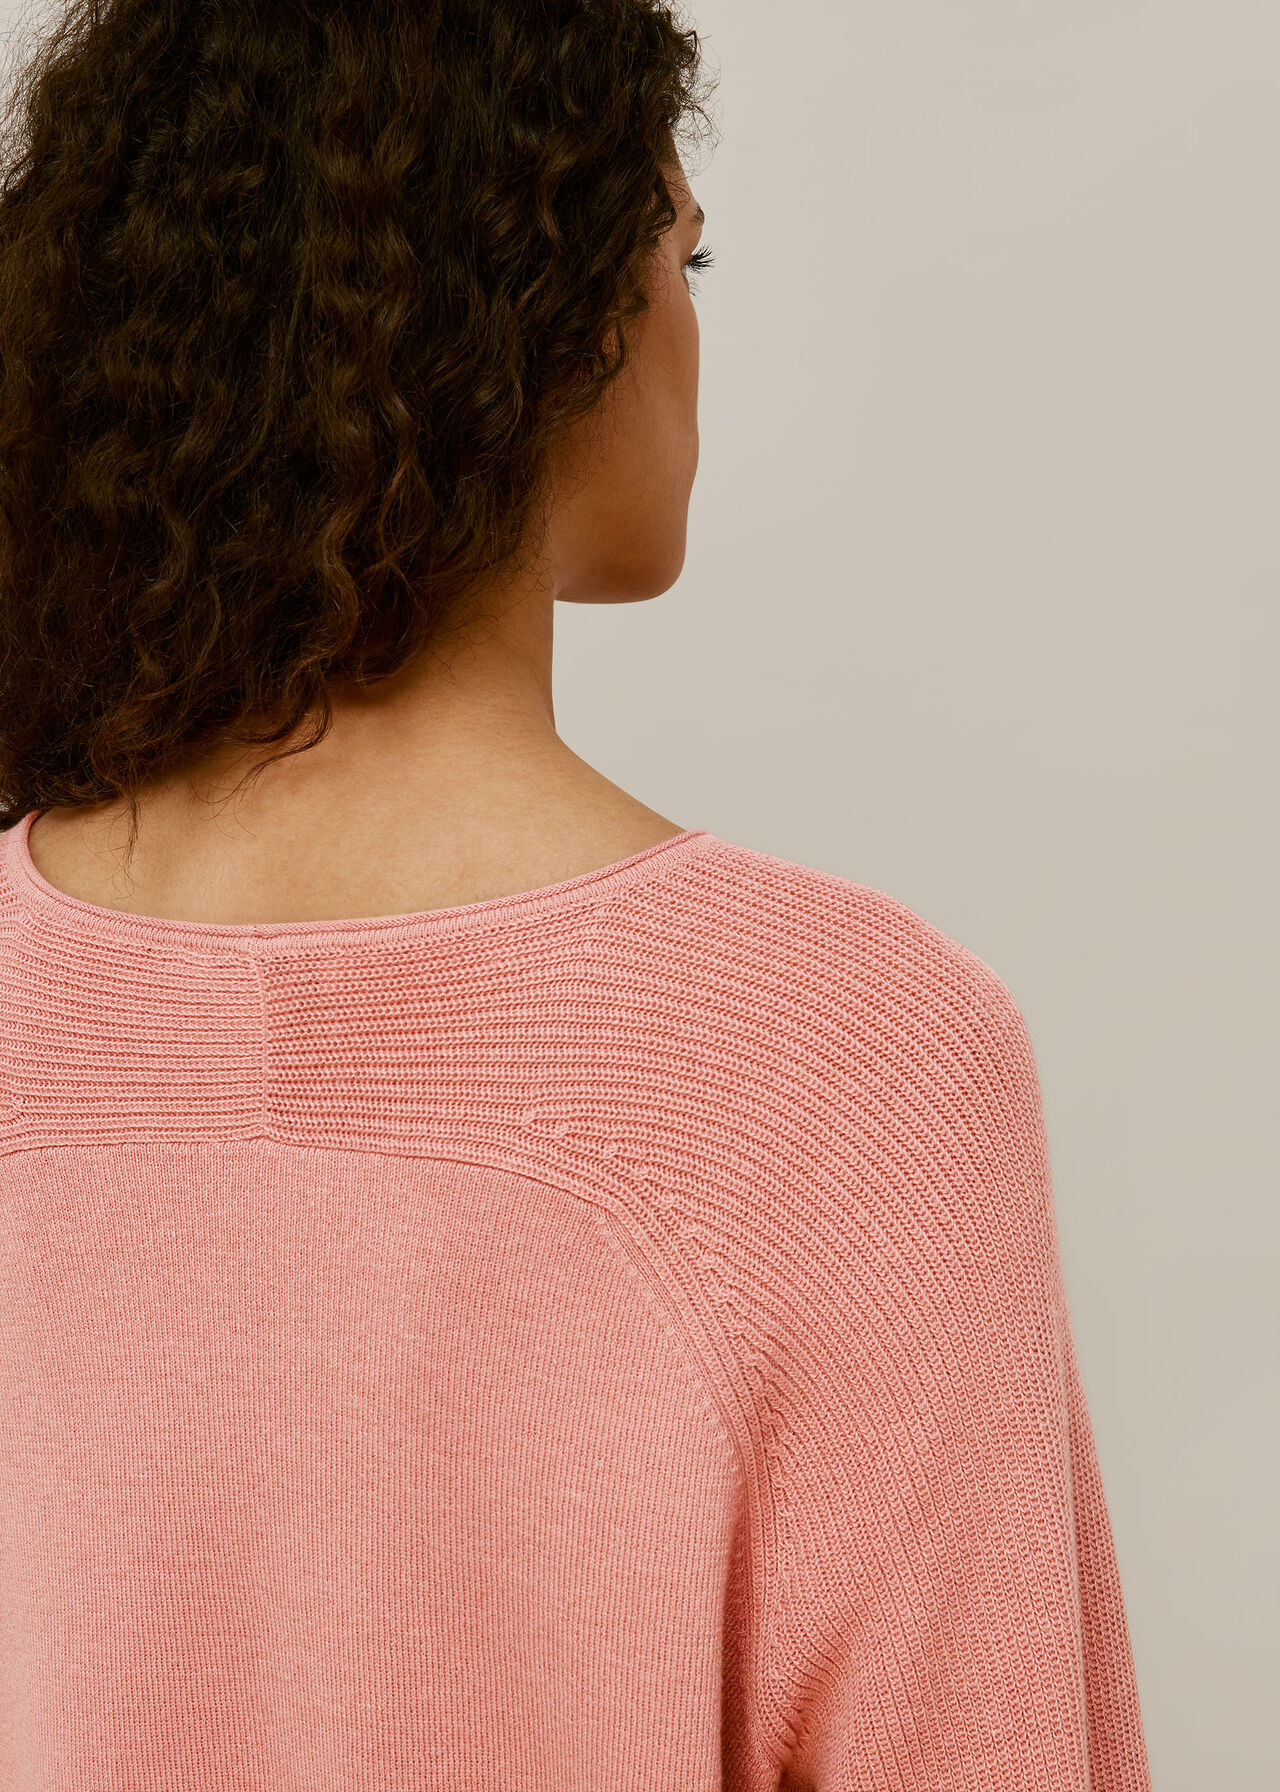 Boat Neck Rib Sleeve Sweater Pale Pink